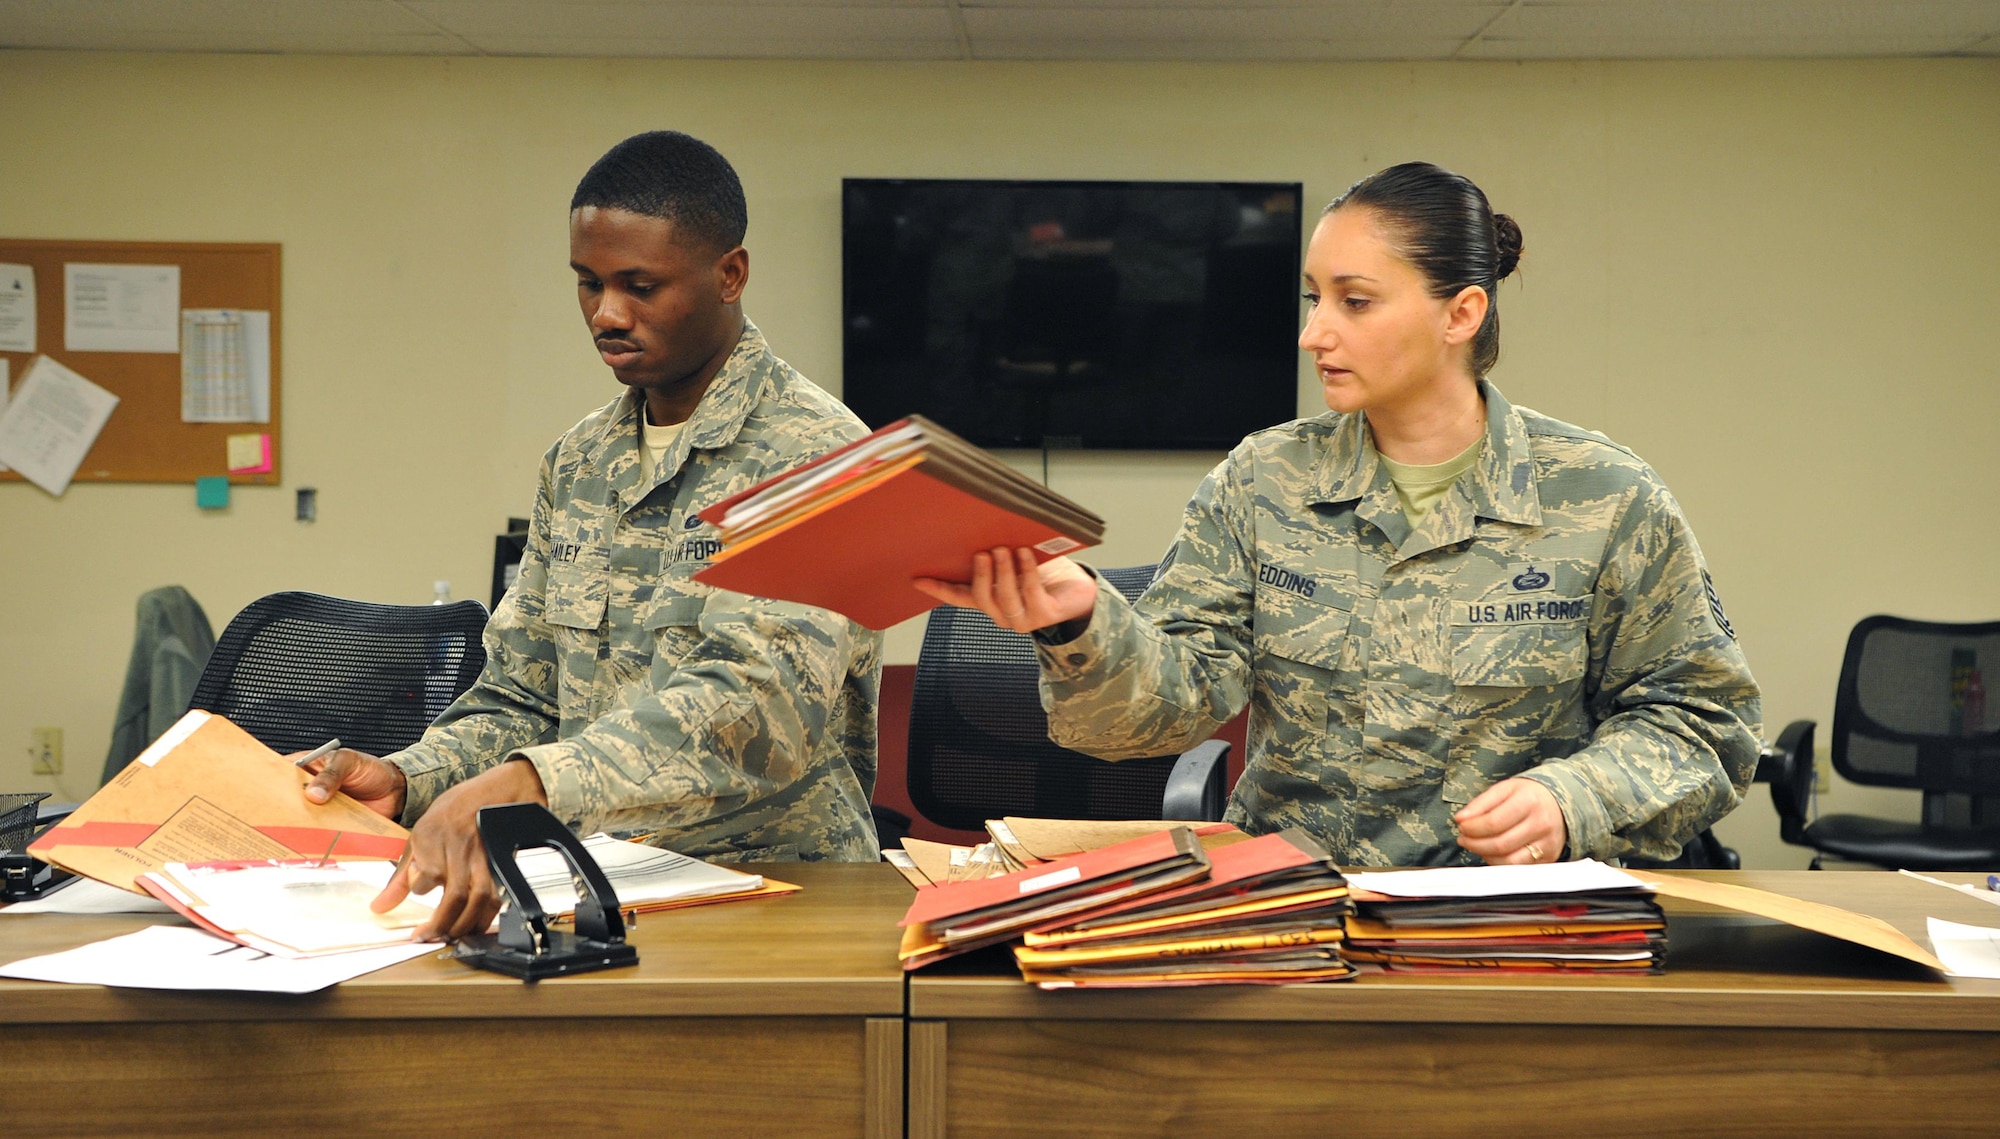 Tech. Sgt. Cassandra Eddins, 9th Force Support Squadron noncommissioned officer in charge of installation personnel readiness, and Senior Airman Kelvin Hailey, 9th FSS IPR journeyman, complete out-processing paperwork for deployers at Beale Air Force Base, California, Feb. 22, 2017. IPR reviews paperwork to ensure there are no discrepancies before individuals leave their home station. (U.S. Air Force photo/Airman Tristan D. Viglianco)